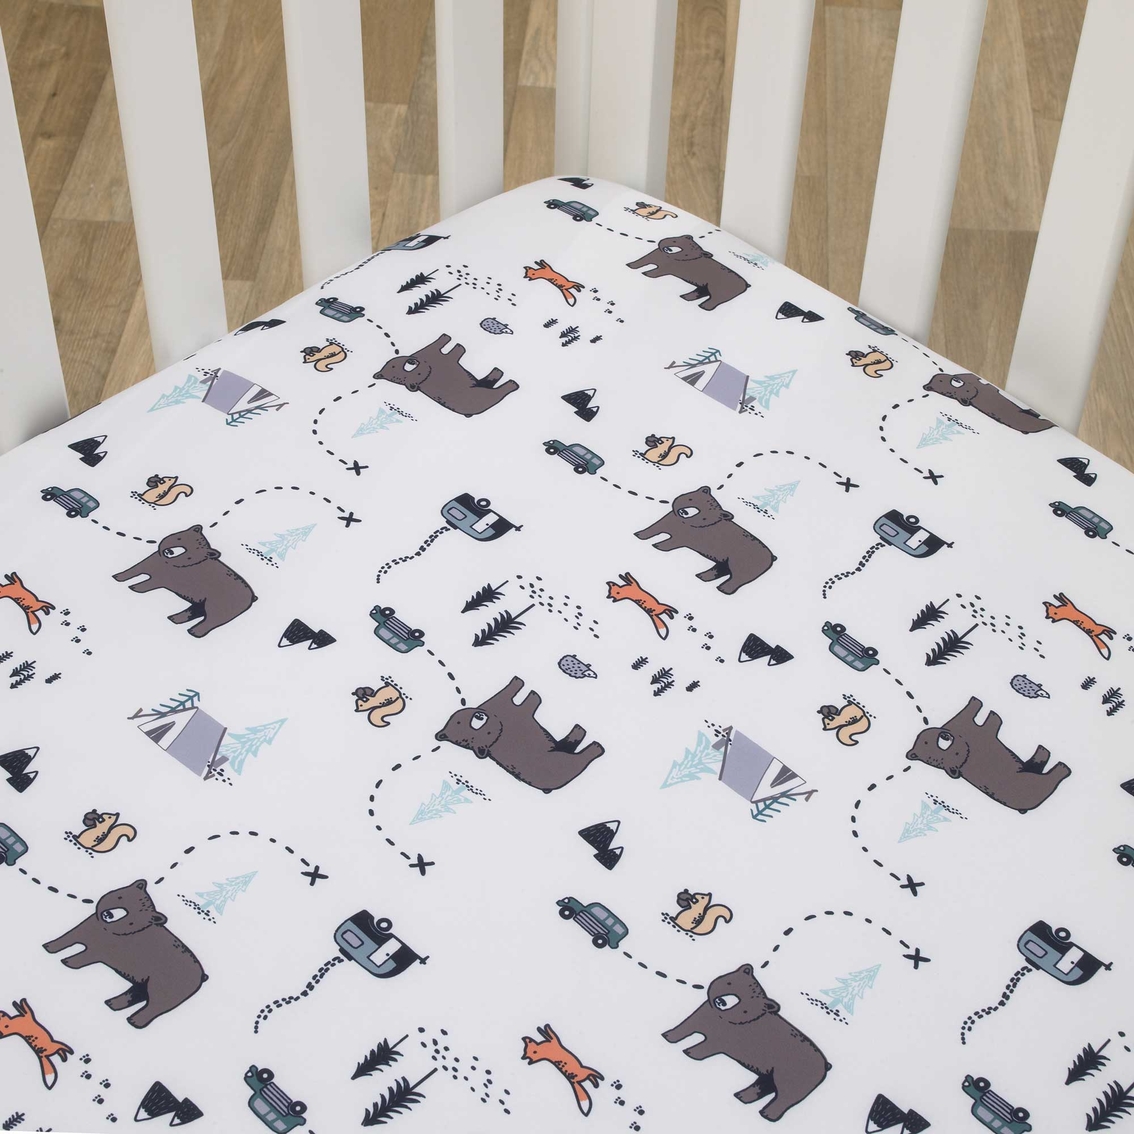 Carter's Woodland Friends Fitted Crib Sheet - Image 2 of 5